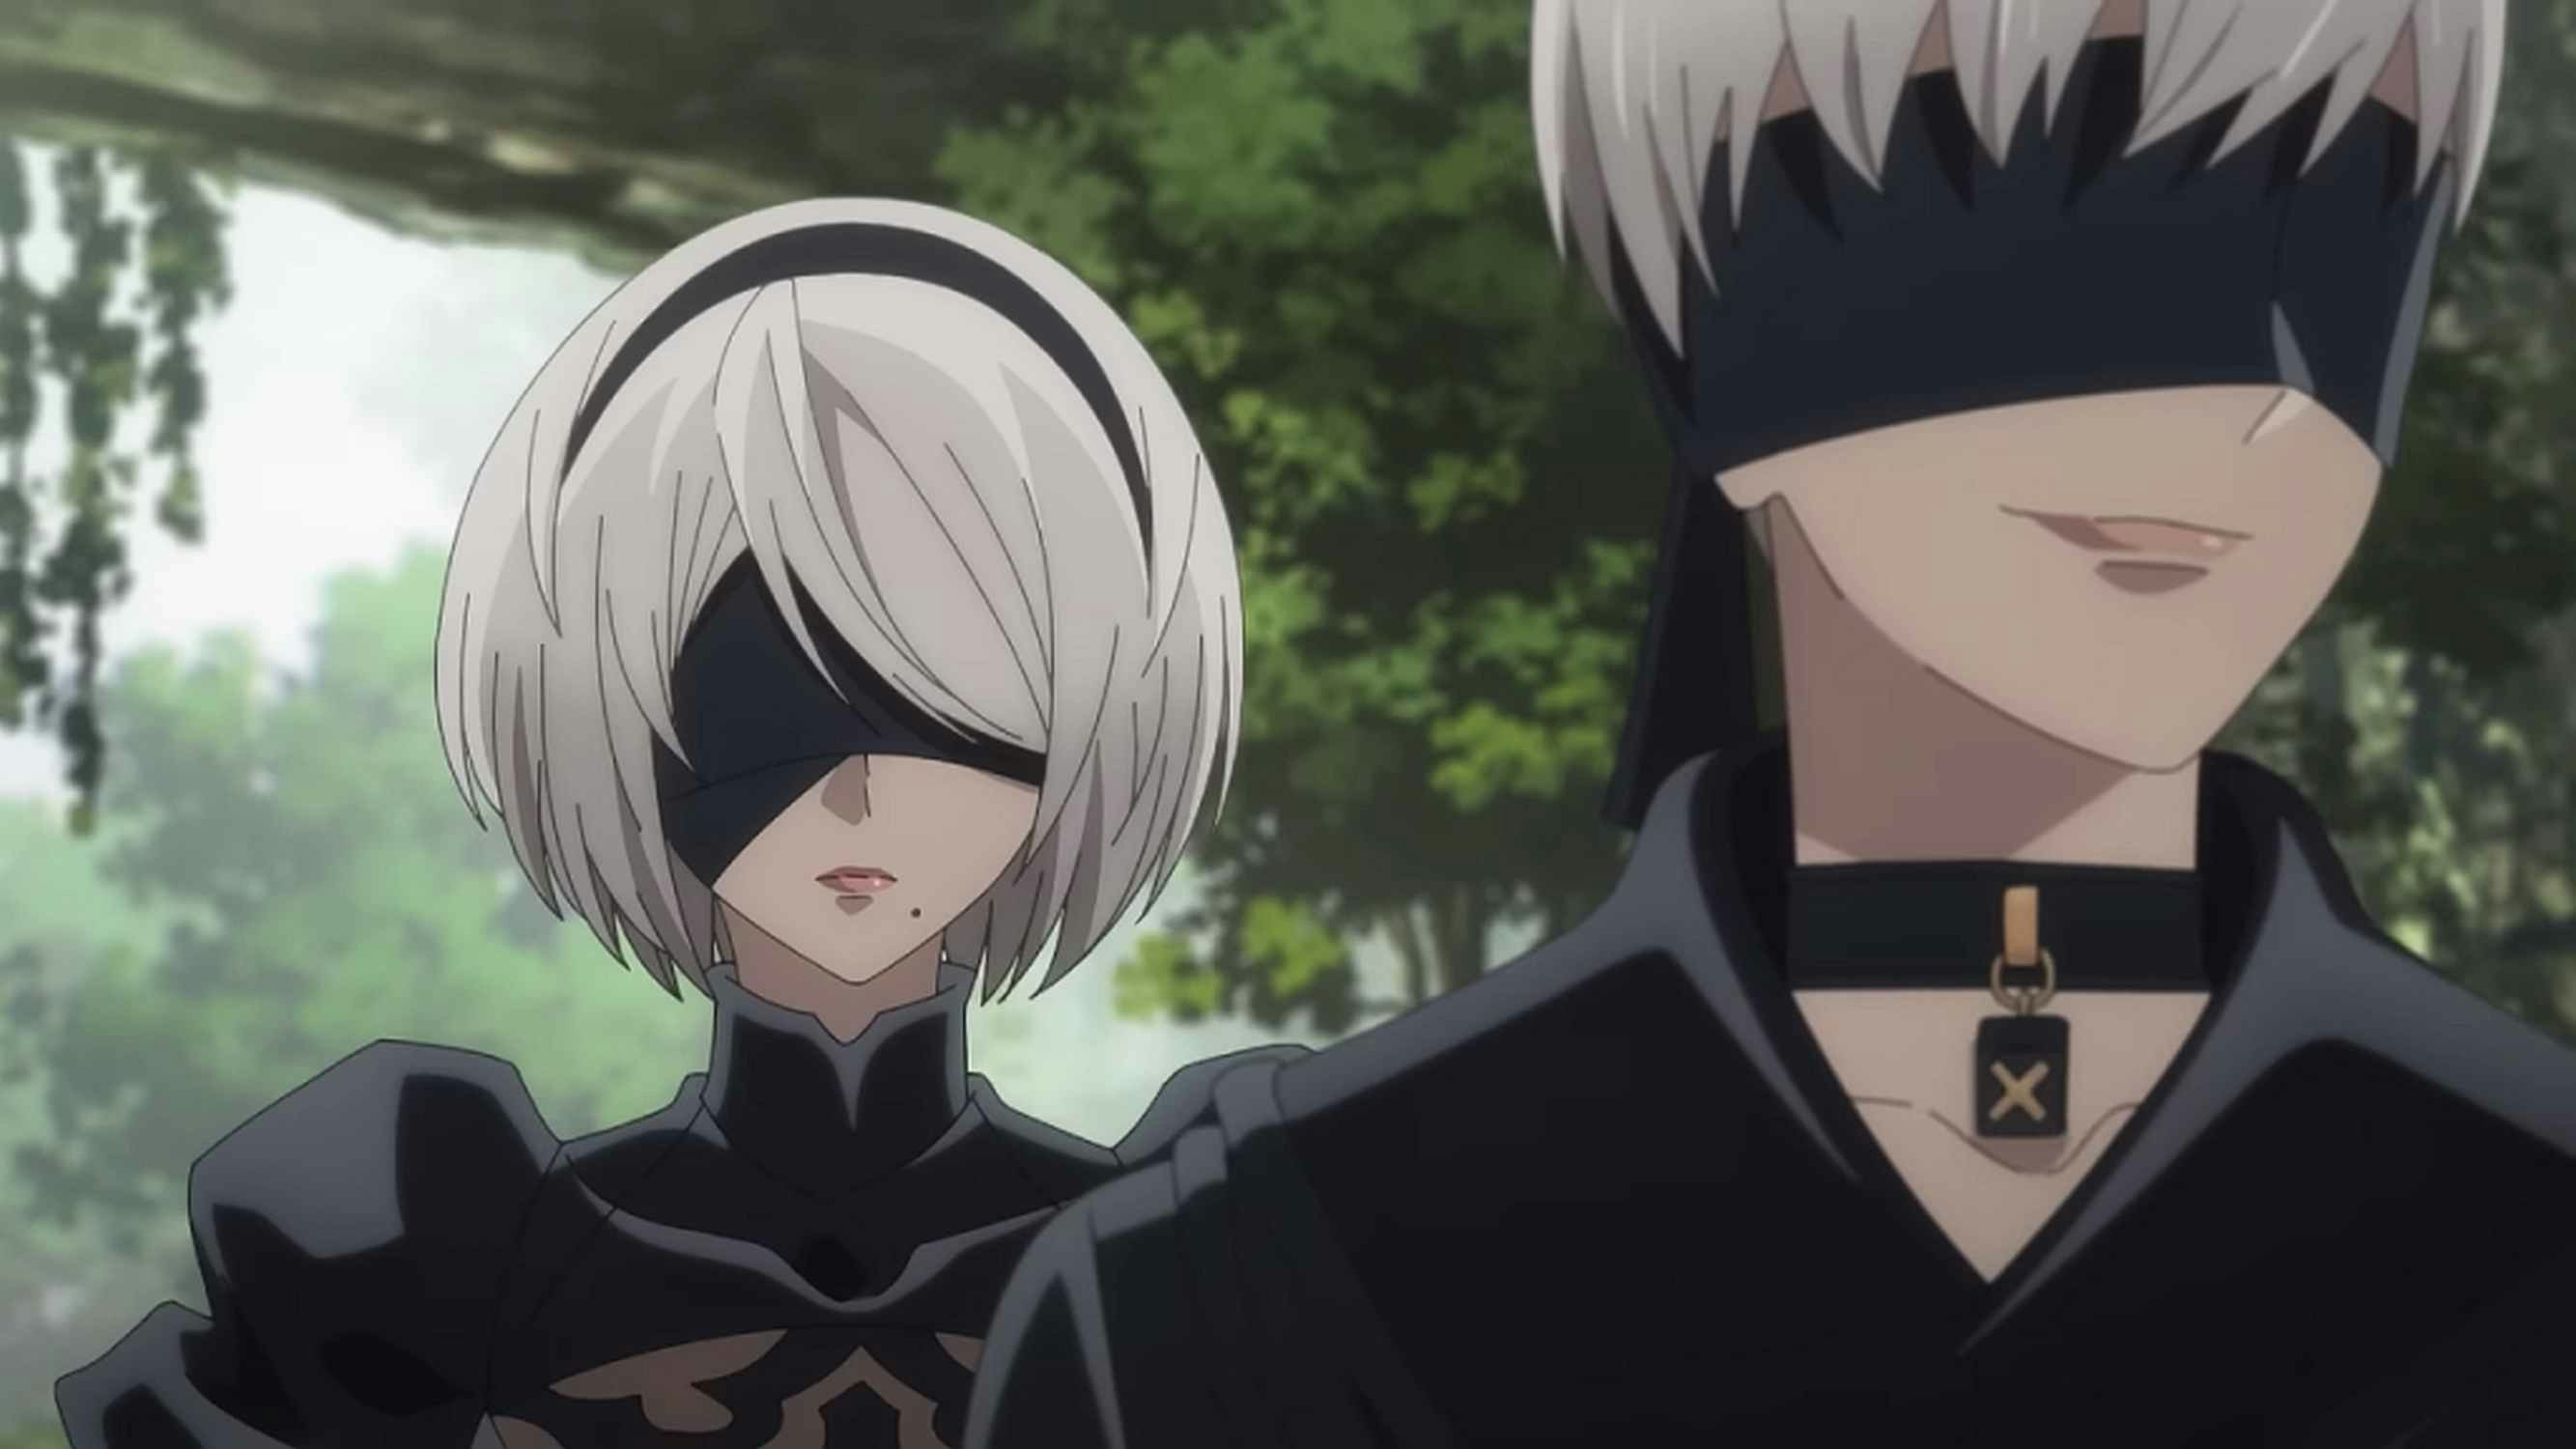 The Nier Automata Anime Fittingly Wrestles with Its Own Existence